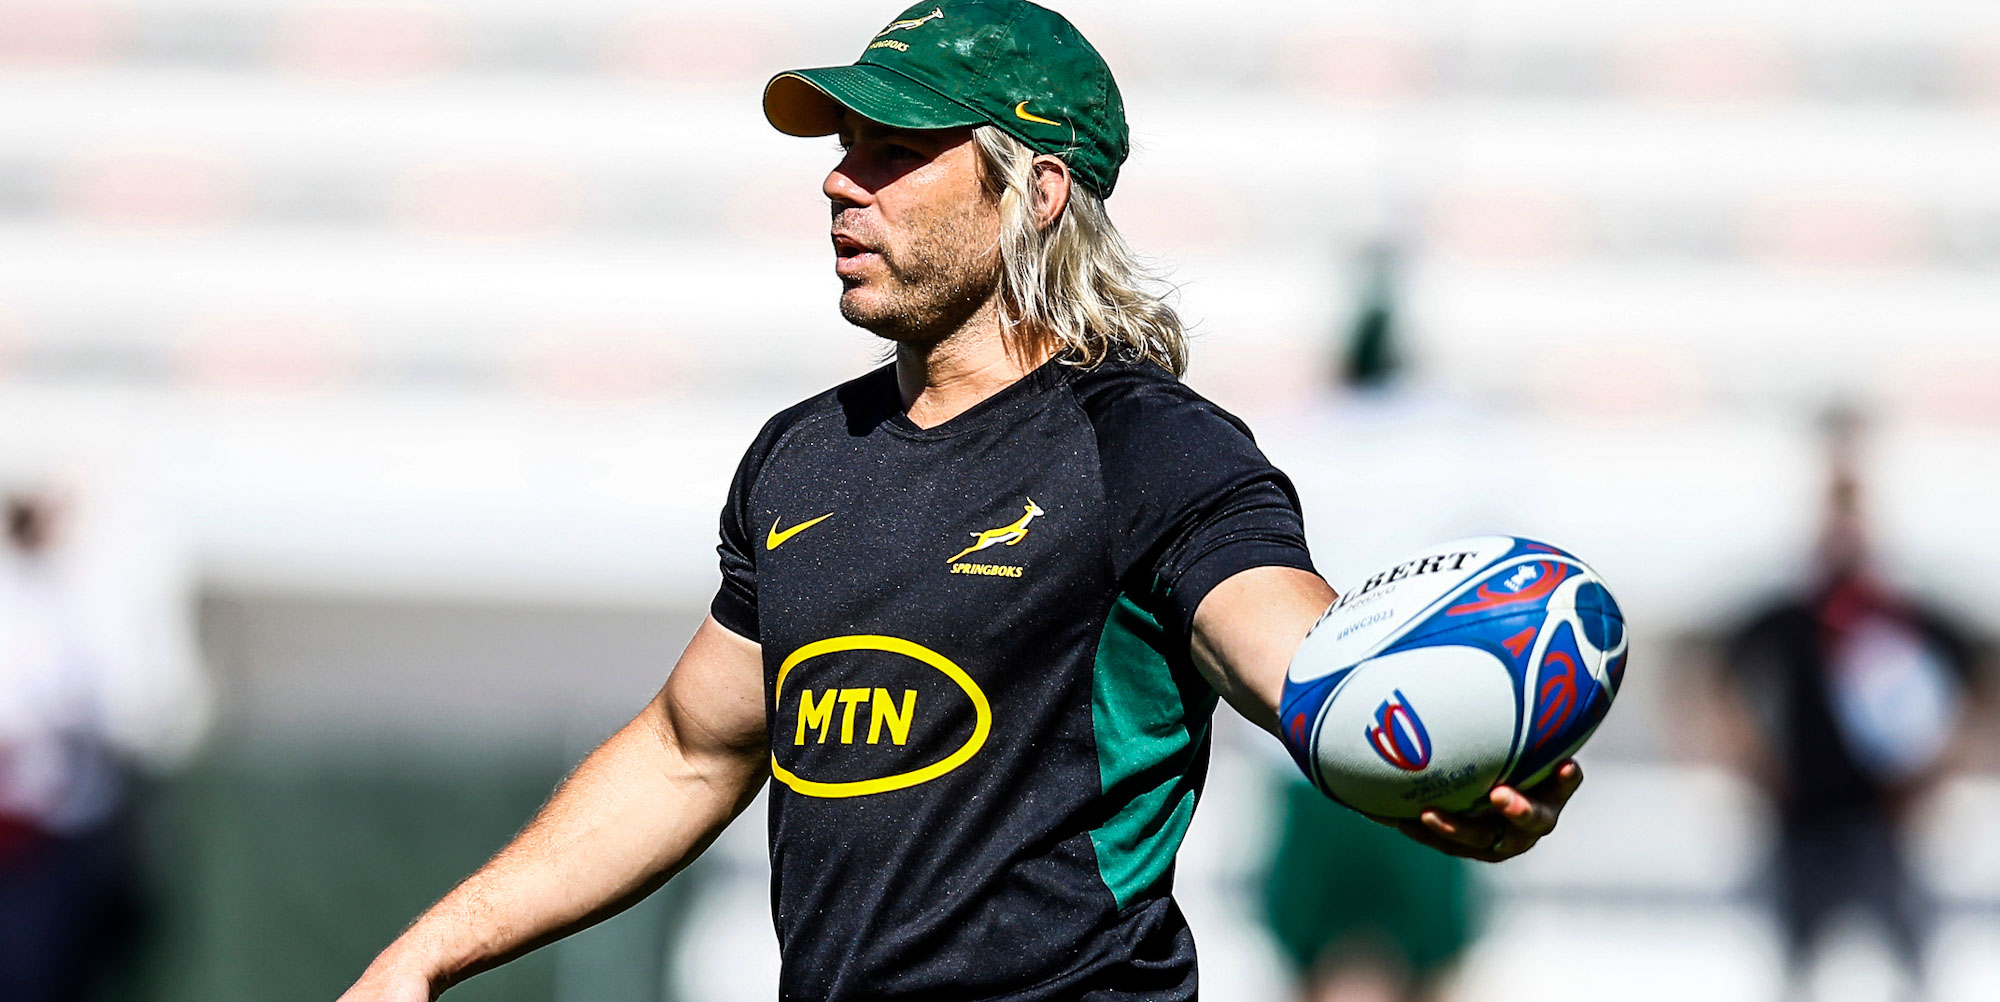 TOULON, FRANCE - SEPTEMBER 07: Faf de Klerk of South Africa during the South Africa men's national rugby team training session at Stade Mayol on September 07, 2023 in Toulon, France. (Photo by Steve Haag/Gallo Images)